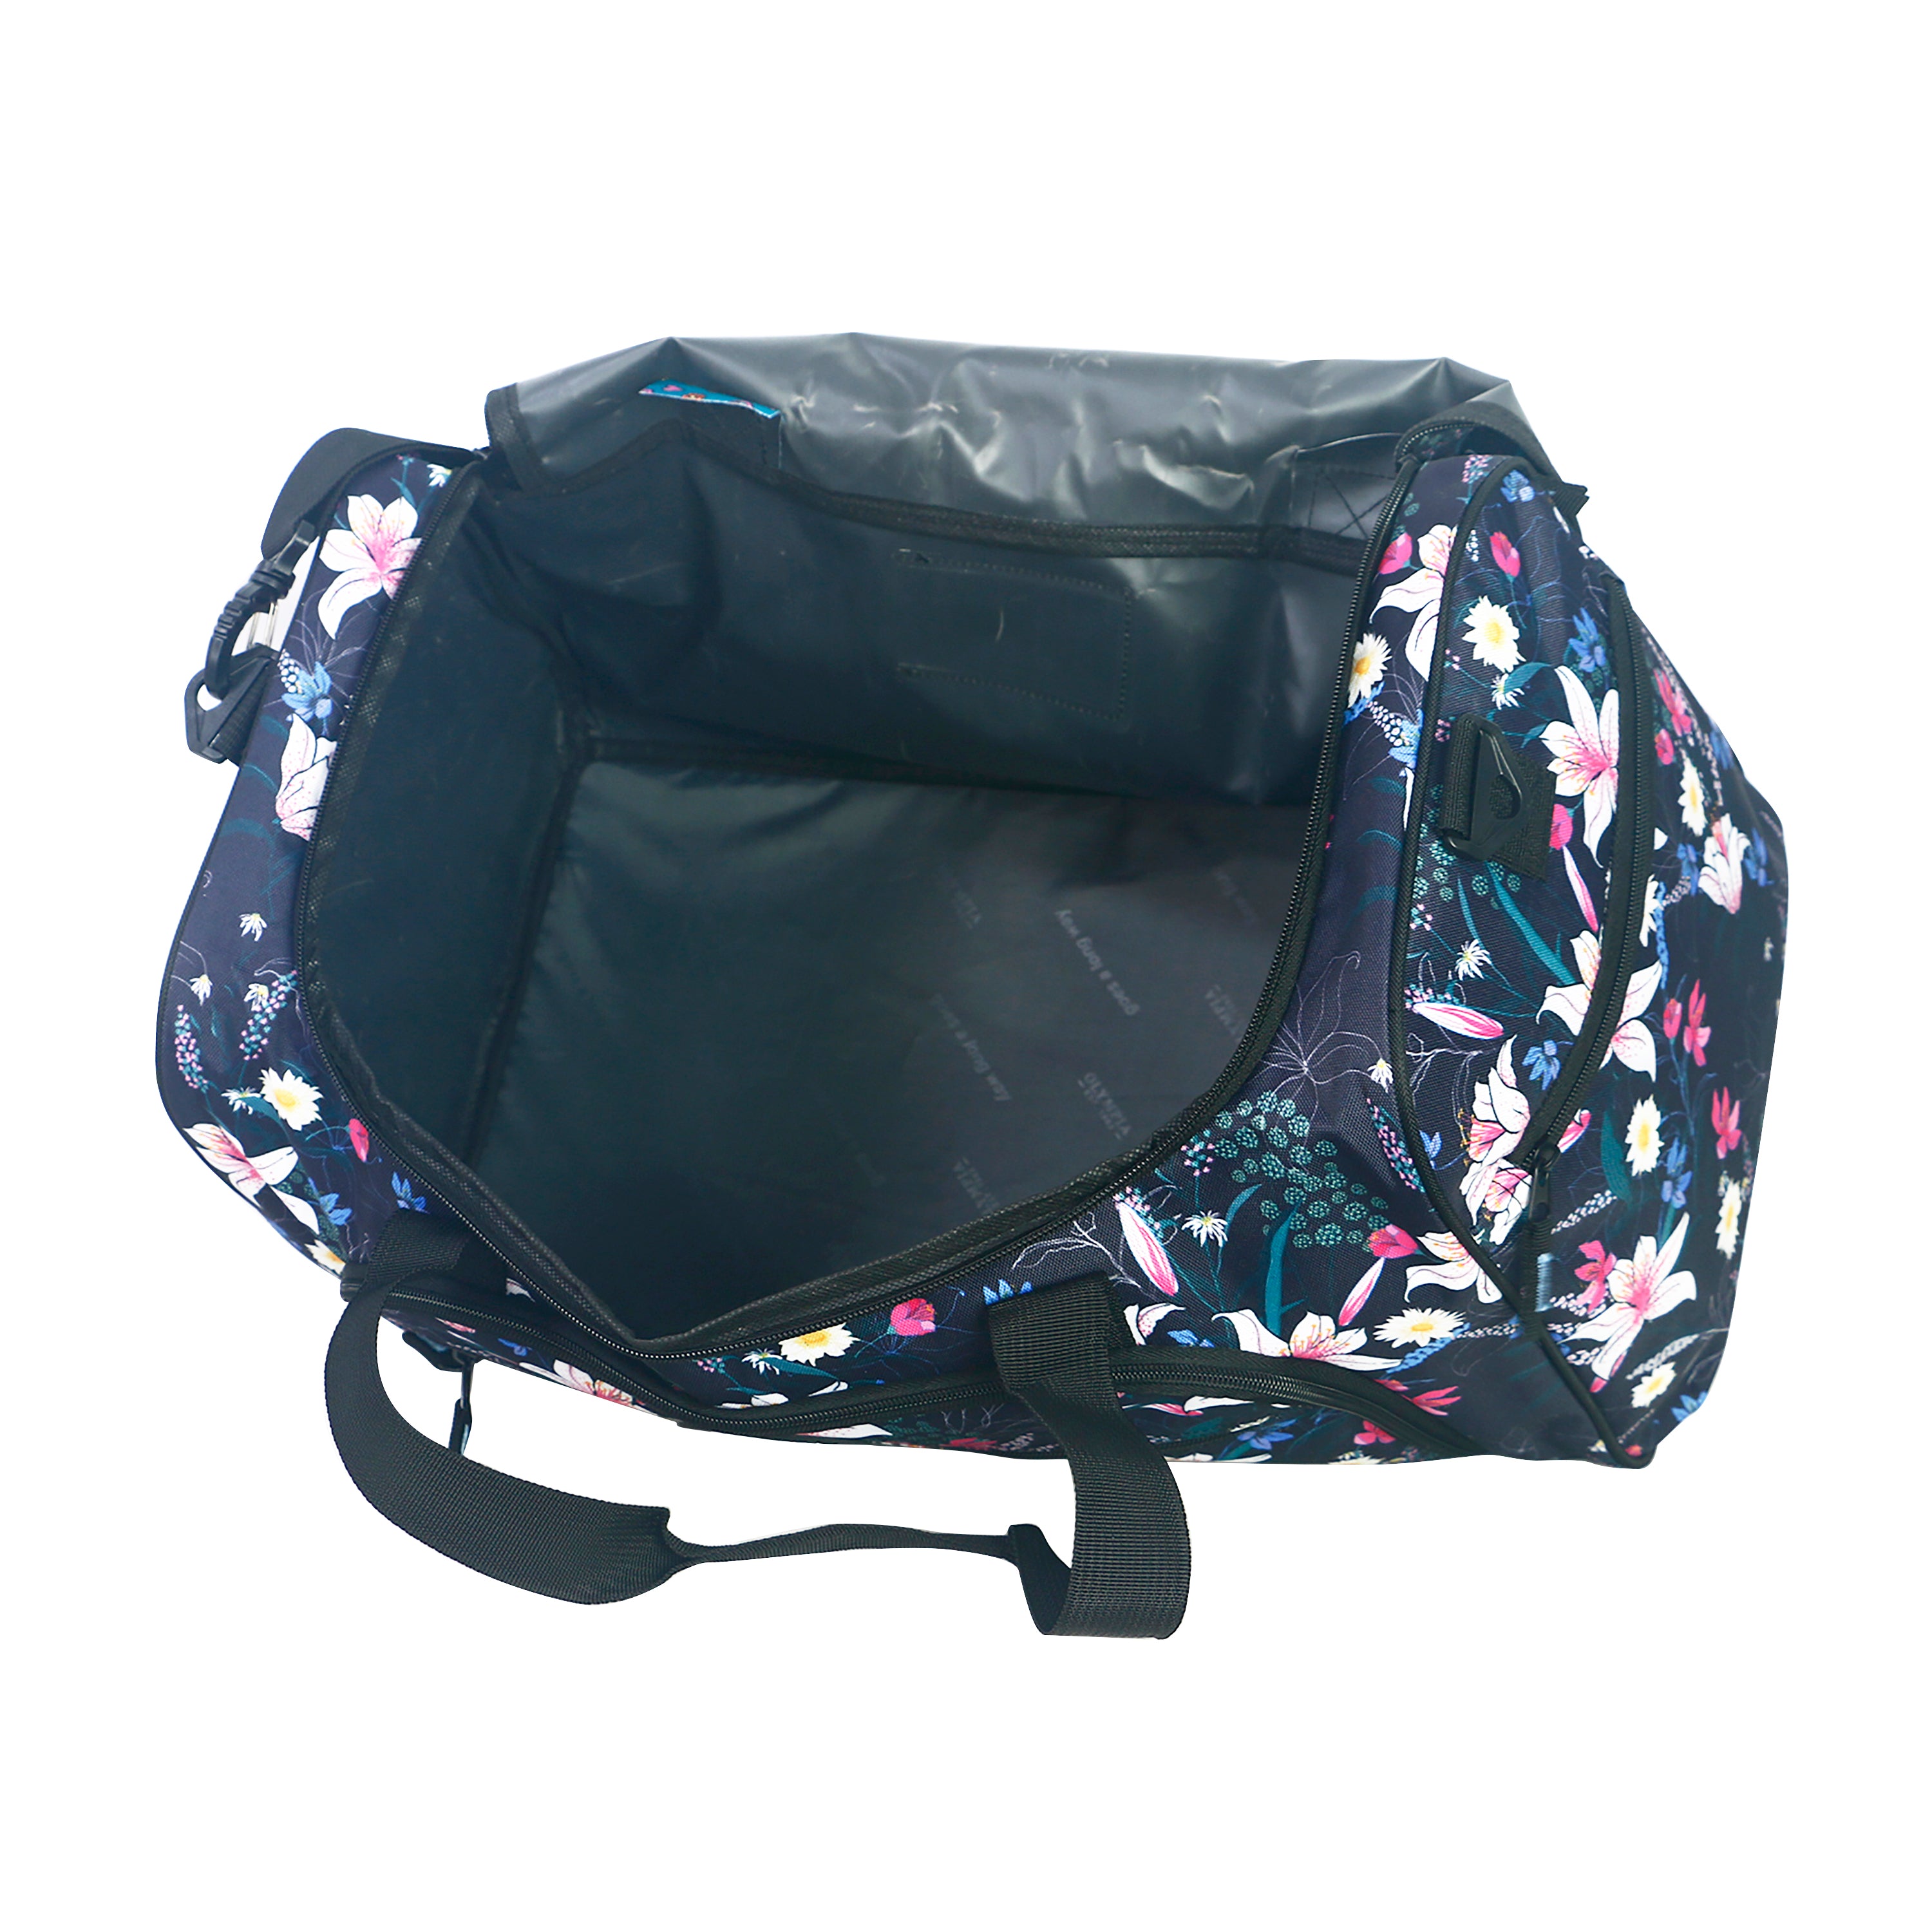 {Mother's Day Special} Water Resistant Lightweight Backpack, Duffel and Denmark Carry-On 3 Piece Set